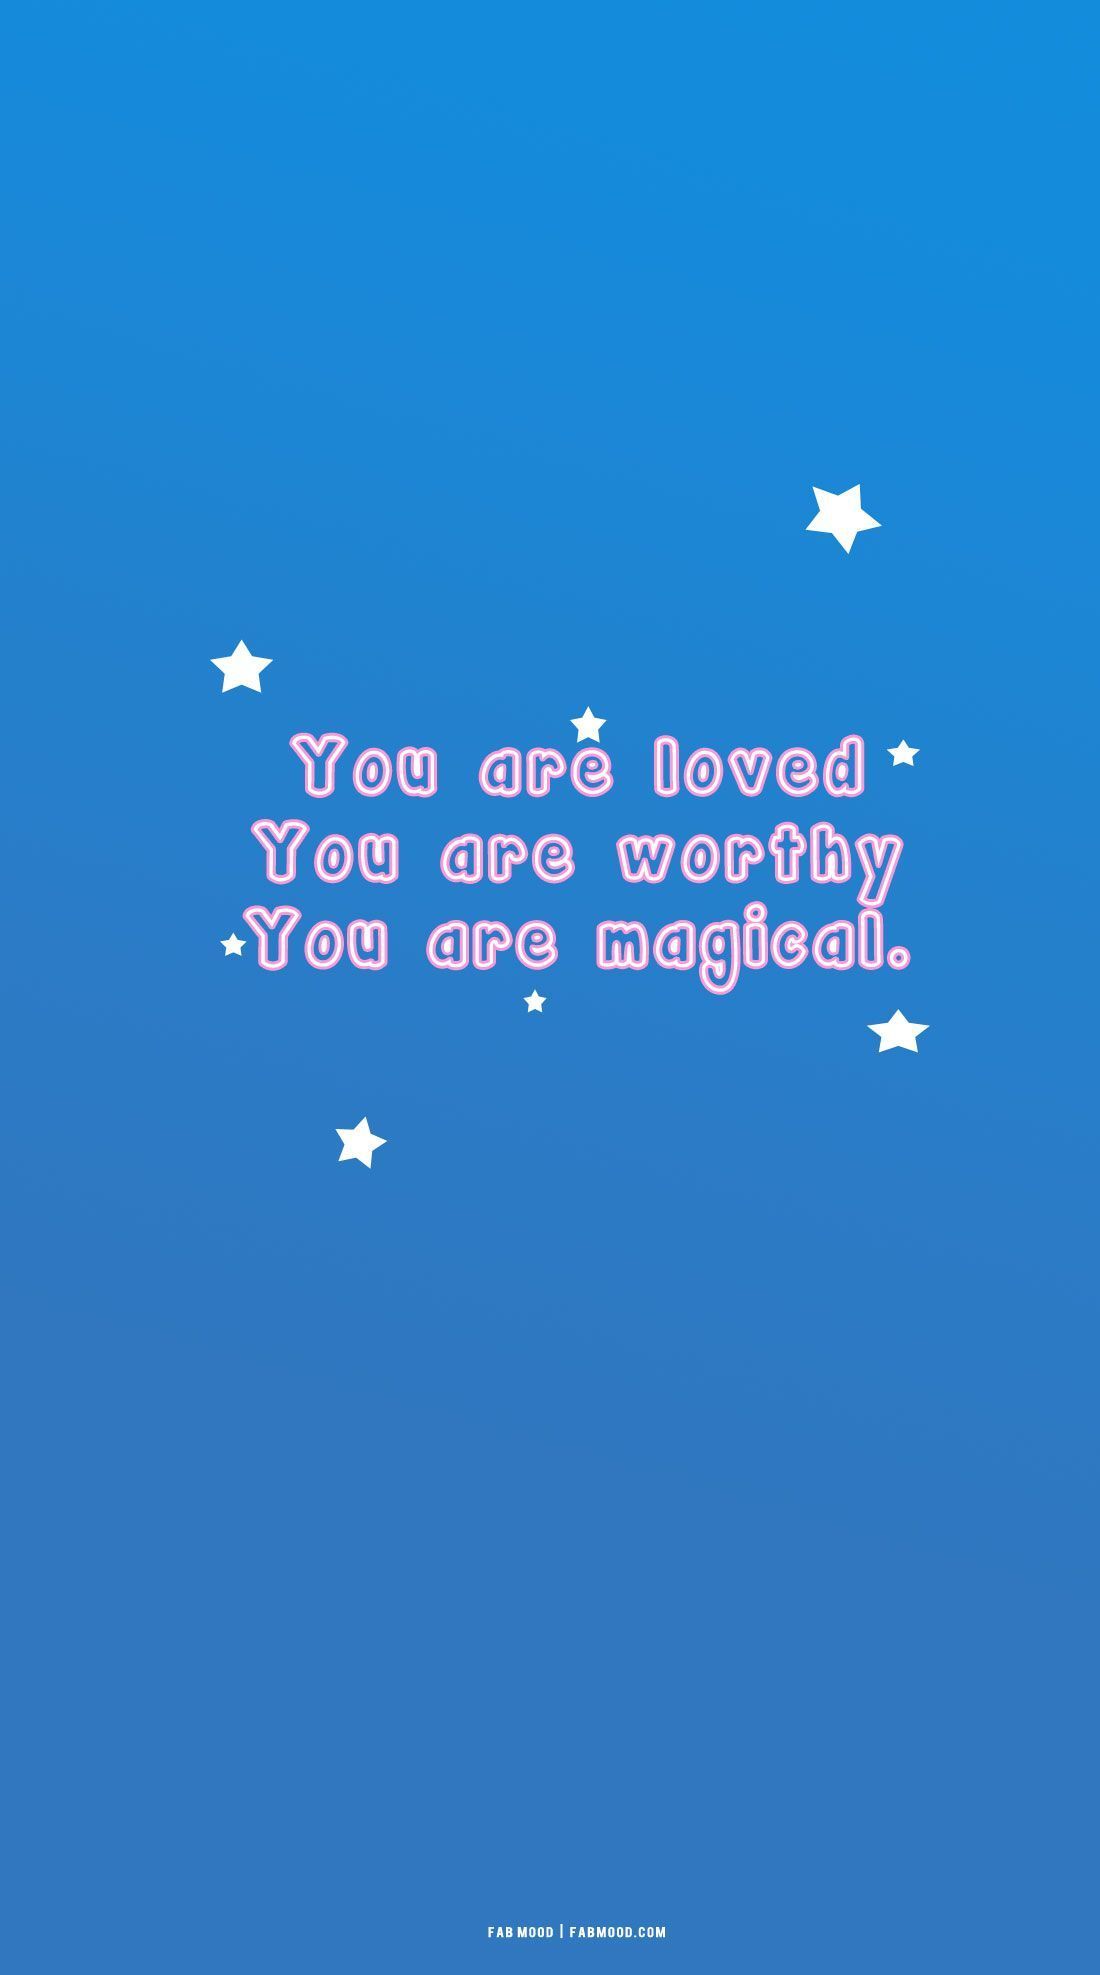 Azure Blue Wallpaper For Phone : You are Loved